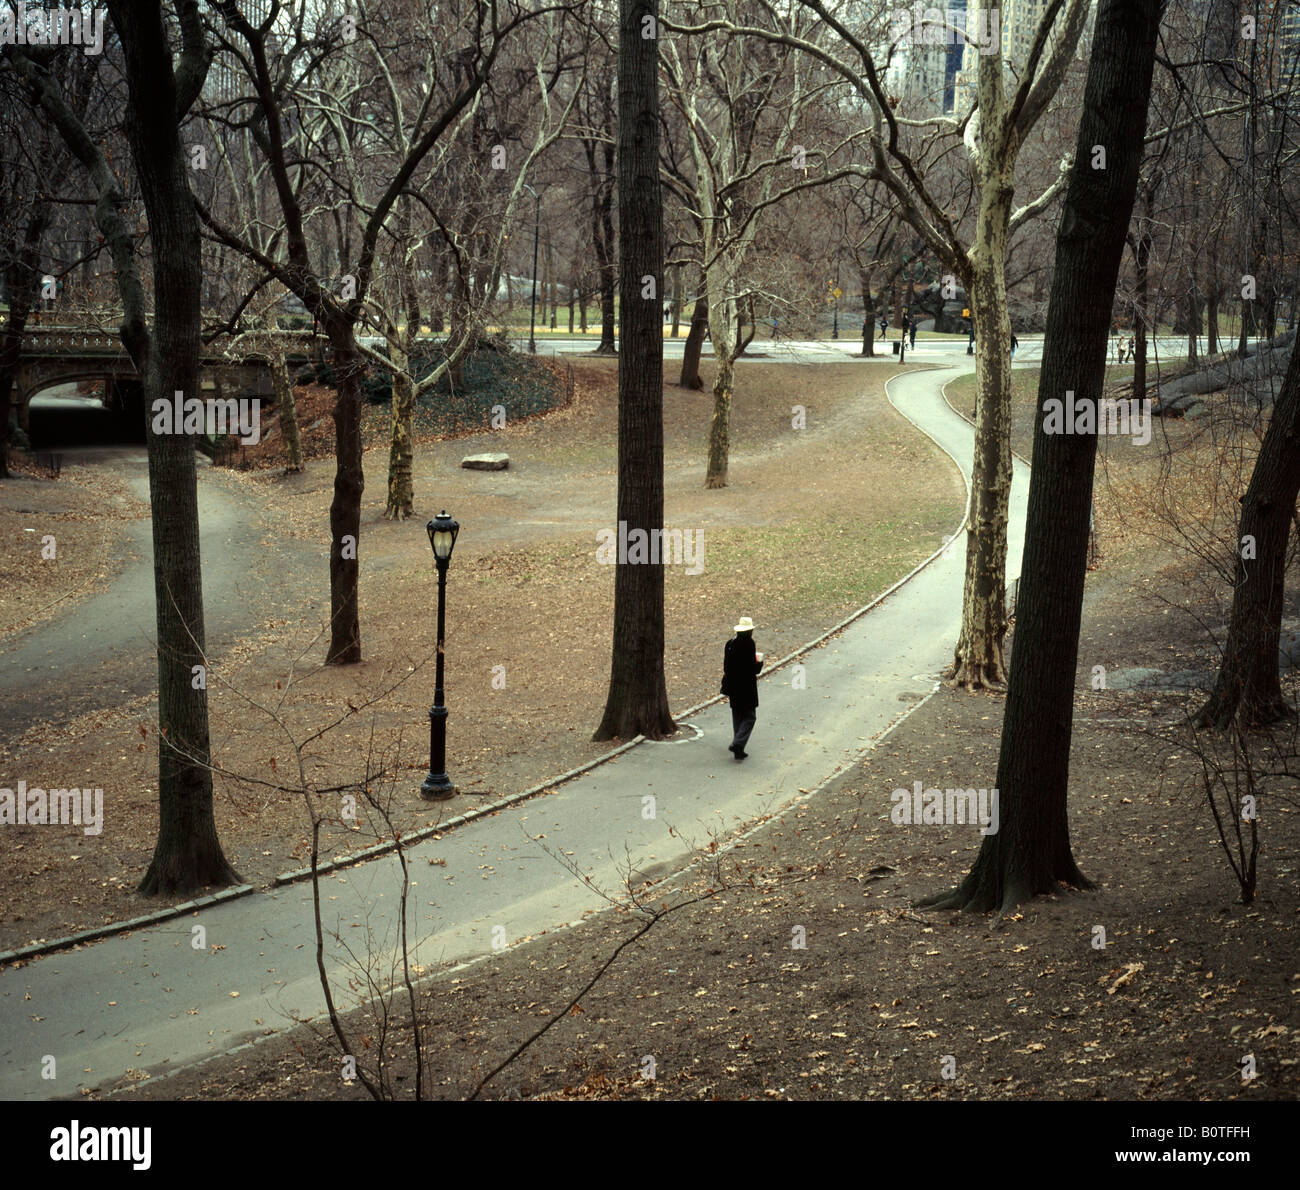 Winter february Central Park NY.Lone walker with his own thoughts on the path among leafless trees Stock Photo